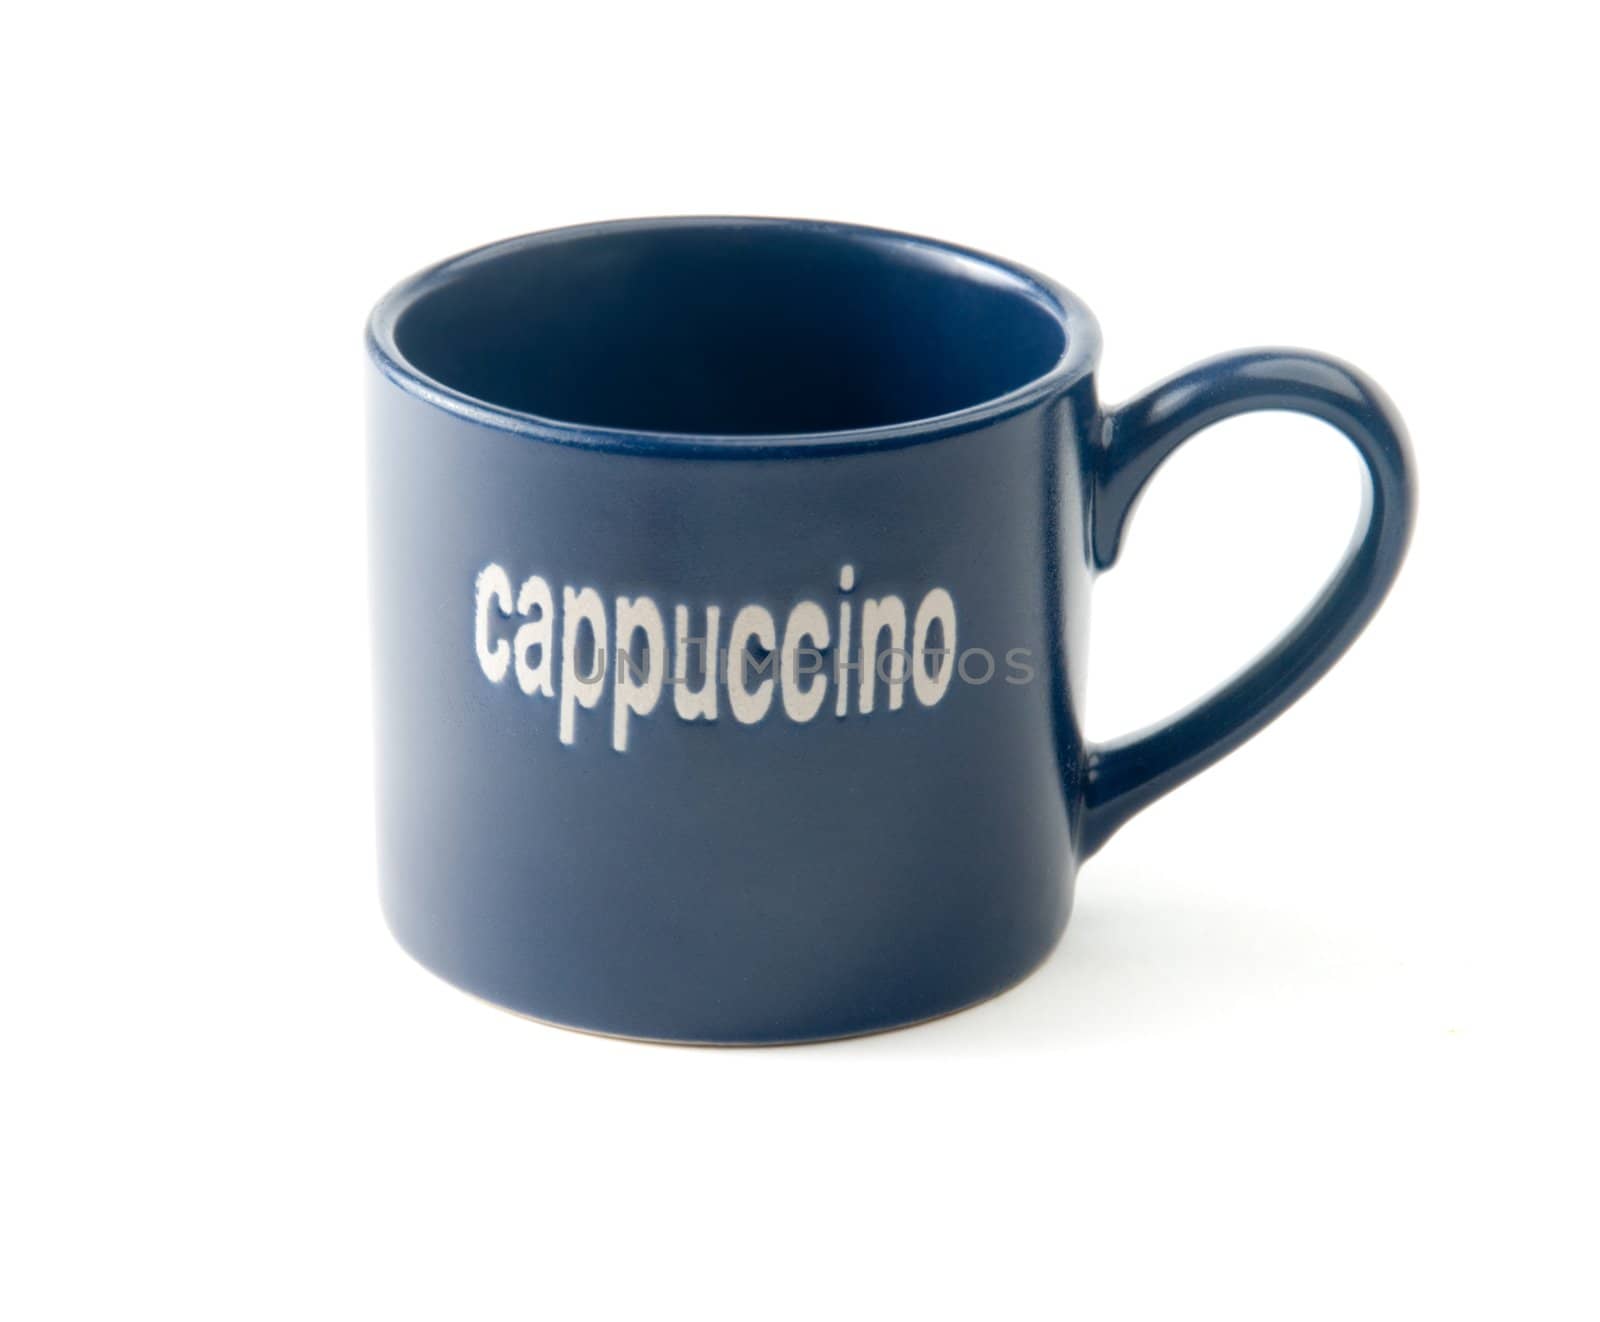 cappuccino cup on white background